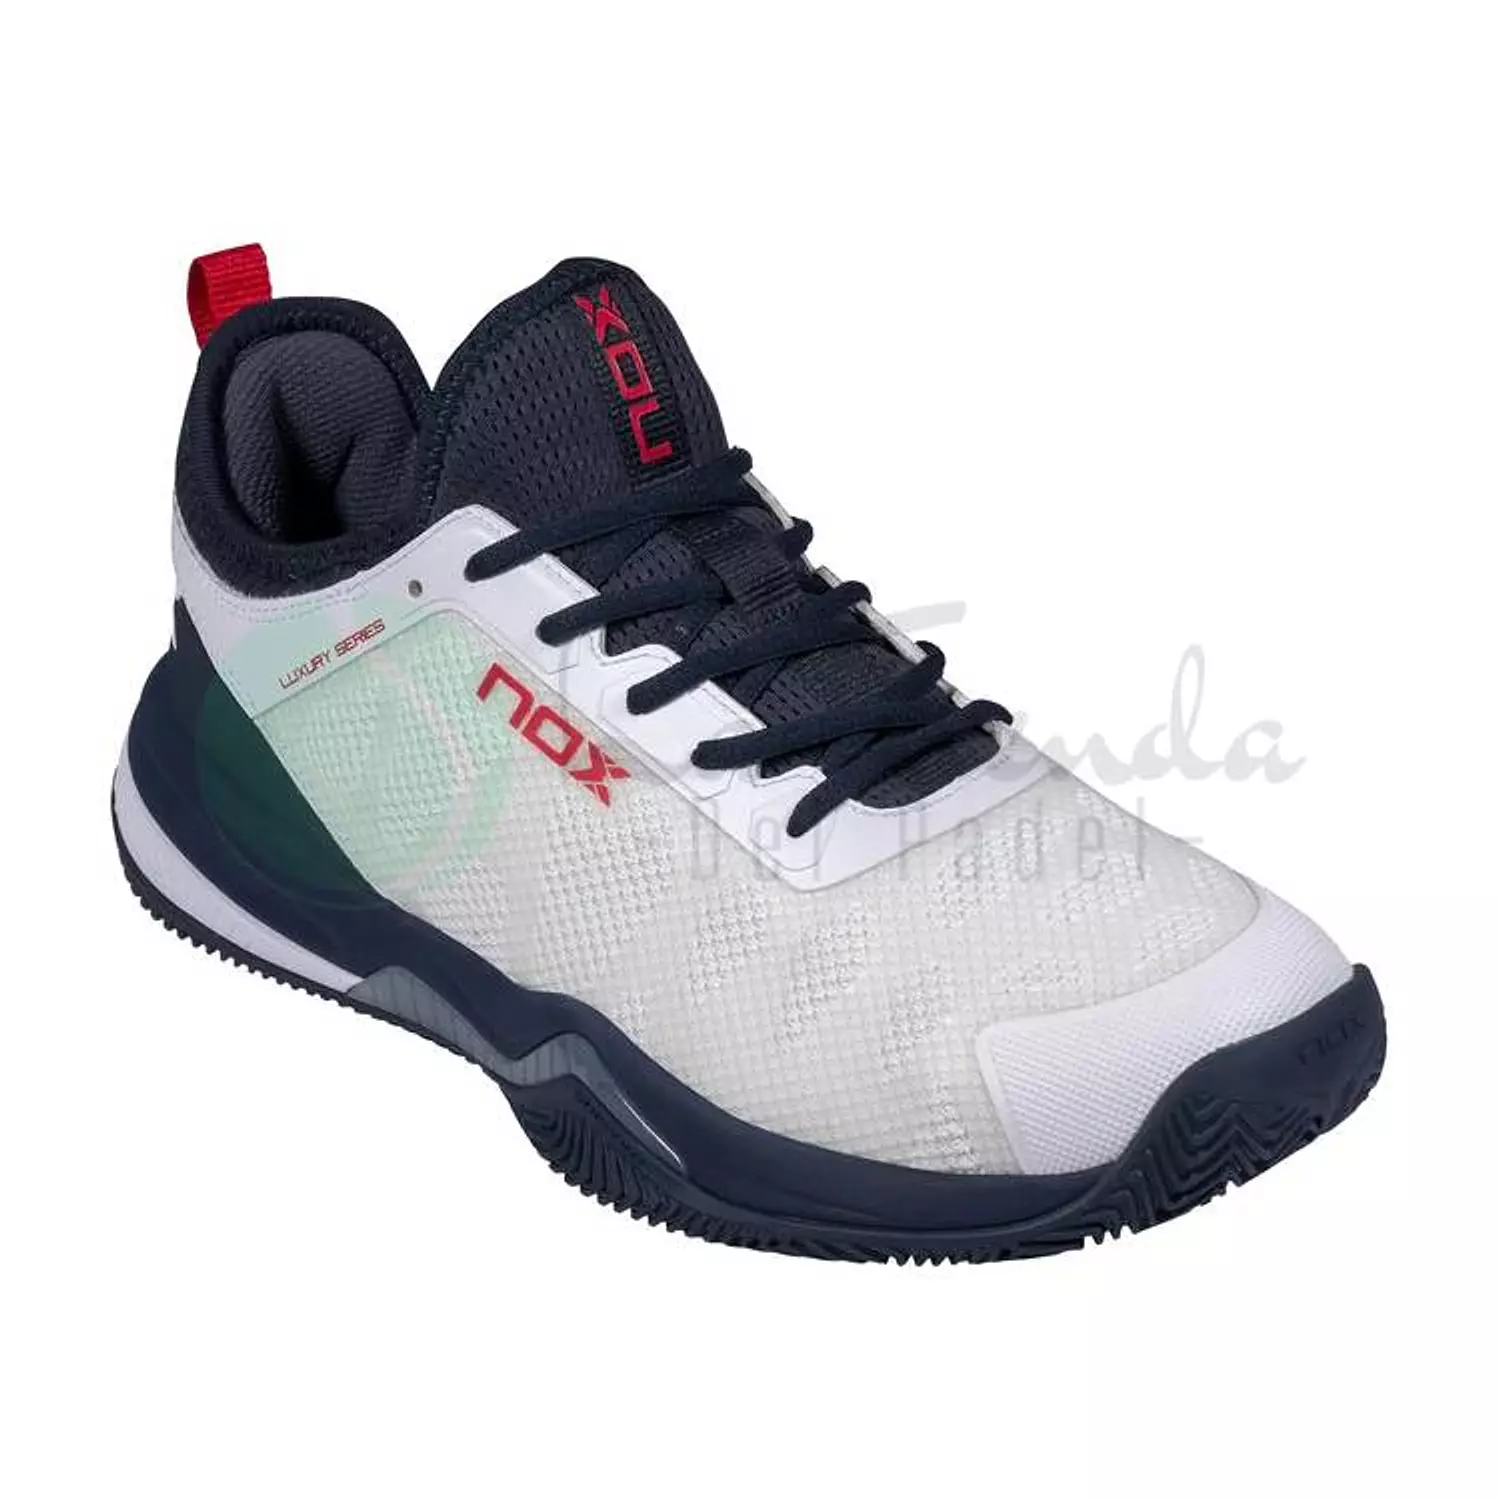 Nox Padel Shoes NERBO white/Blue hover image